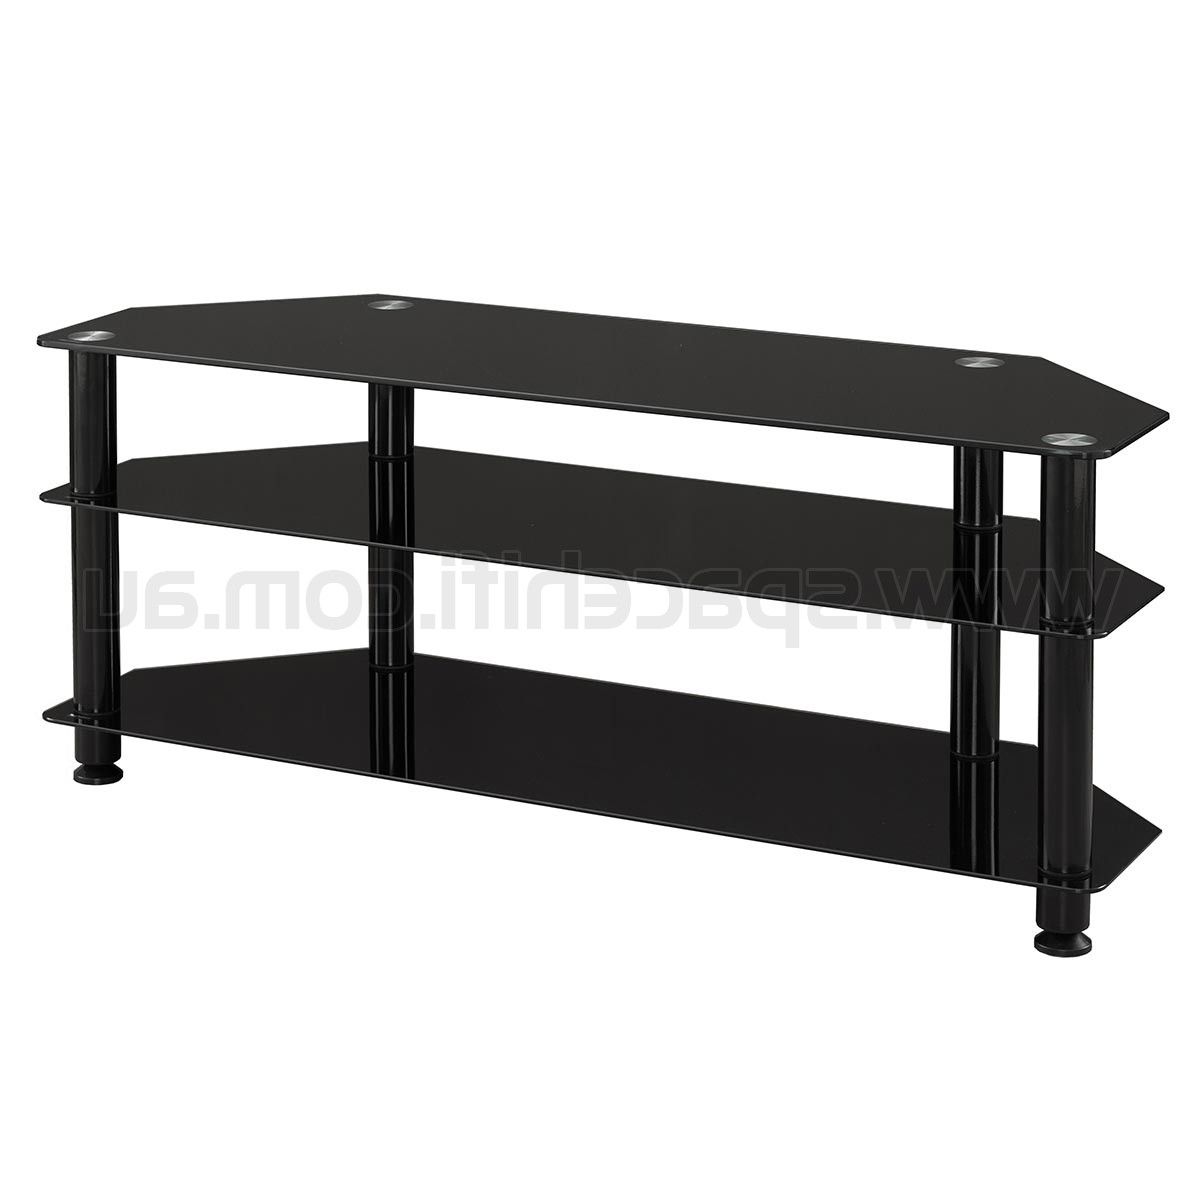 2018 Tauris Ace 1200mm 3 Shelf Glass Tv Unit Stand – Black (View 16 of 20)